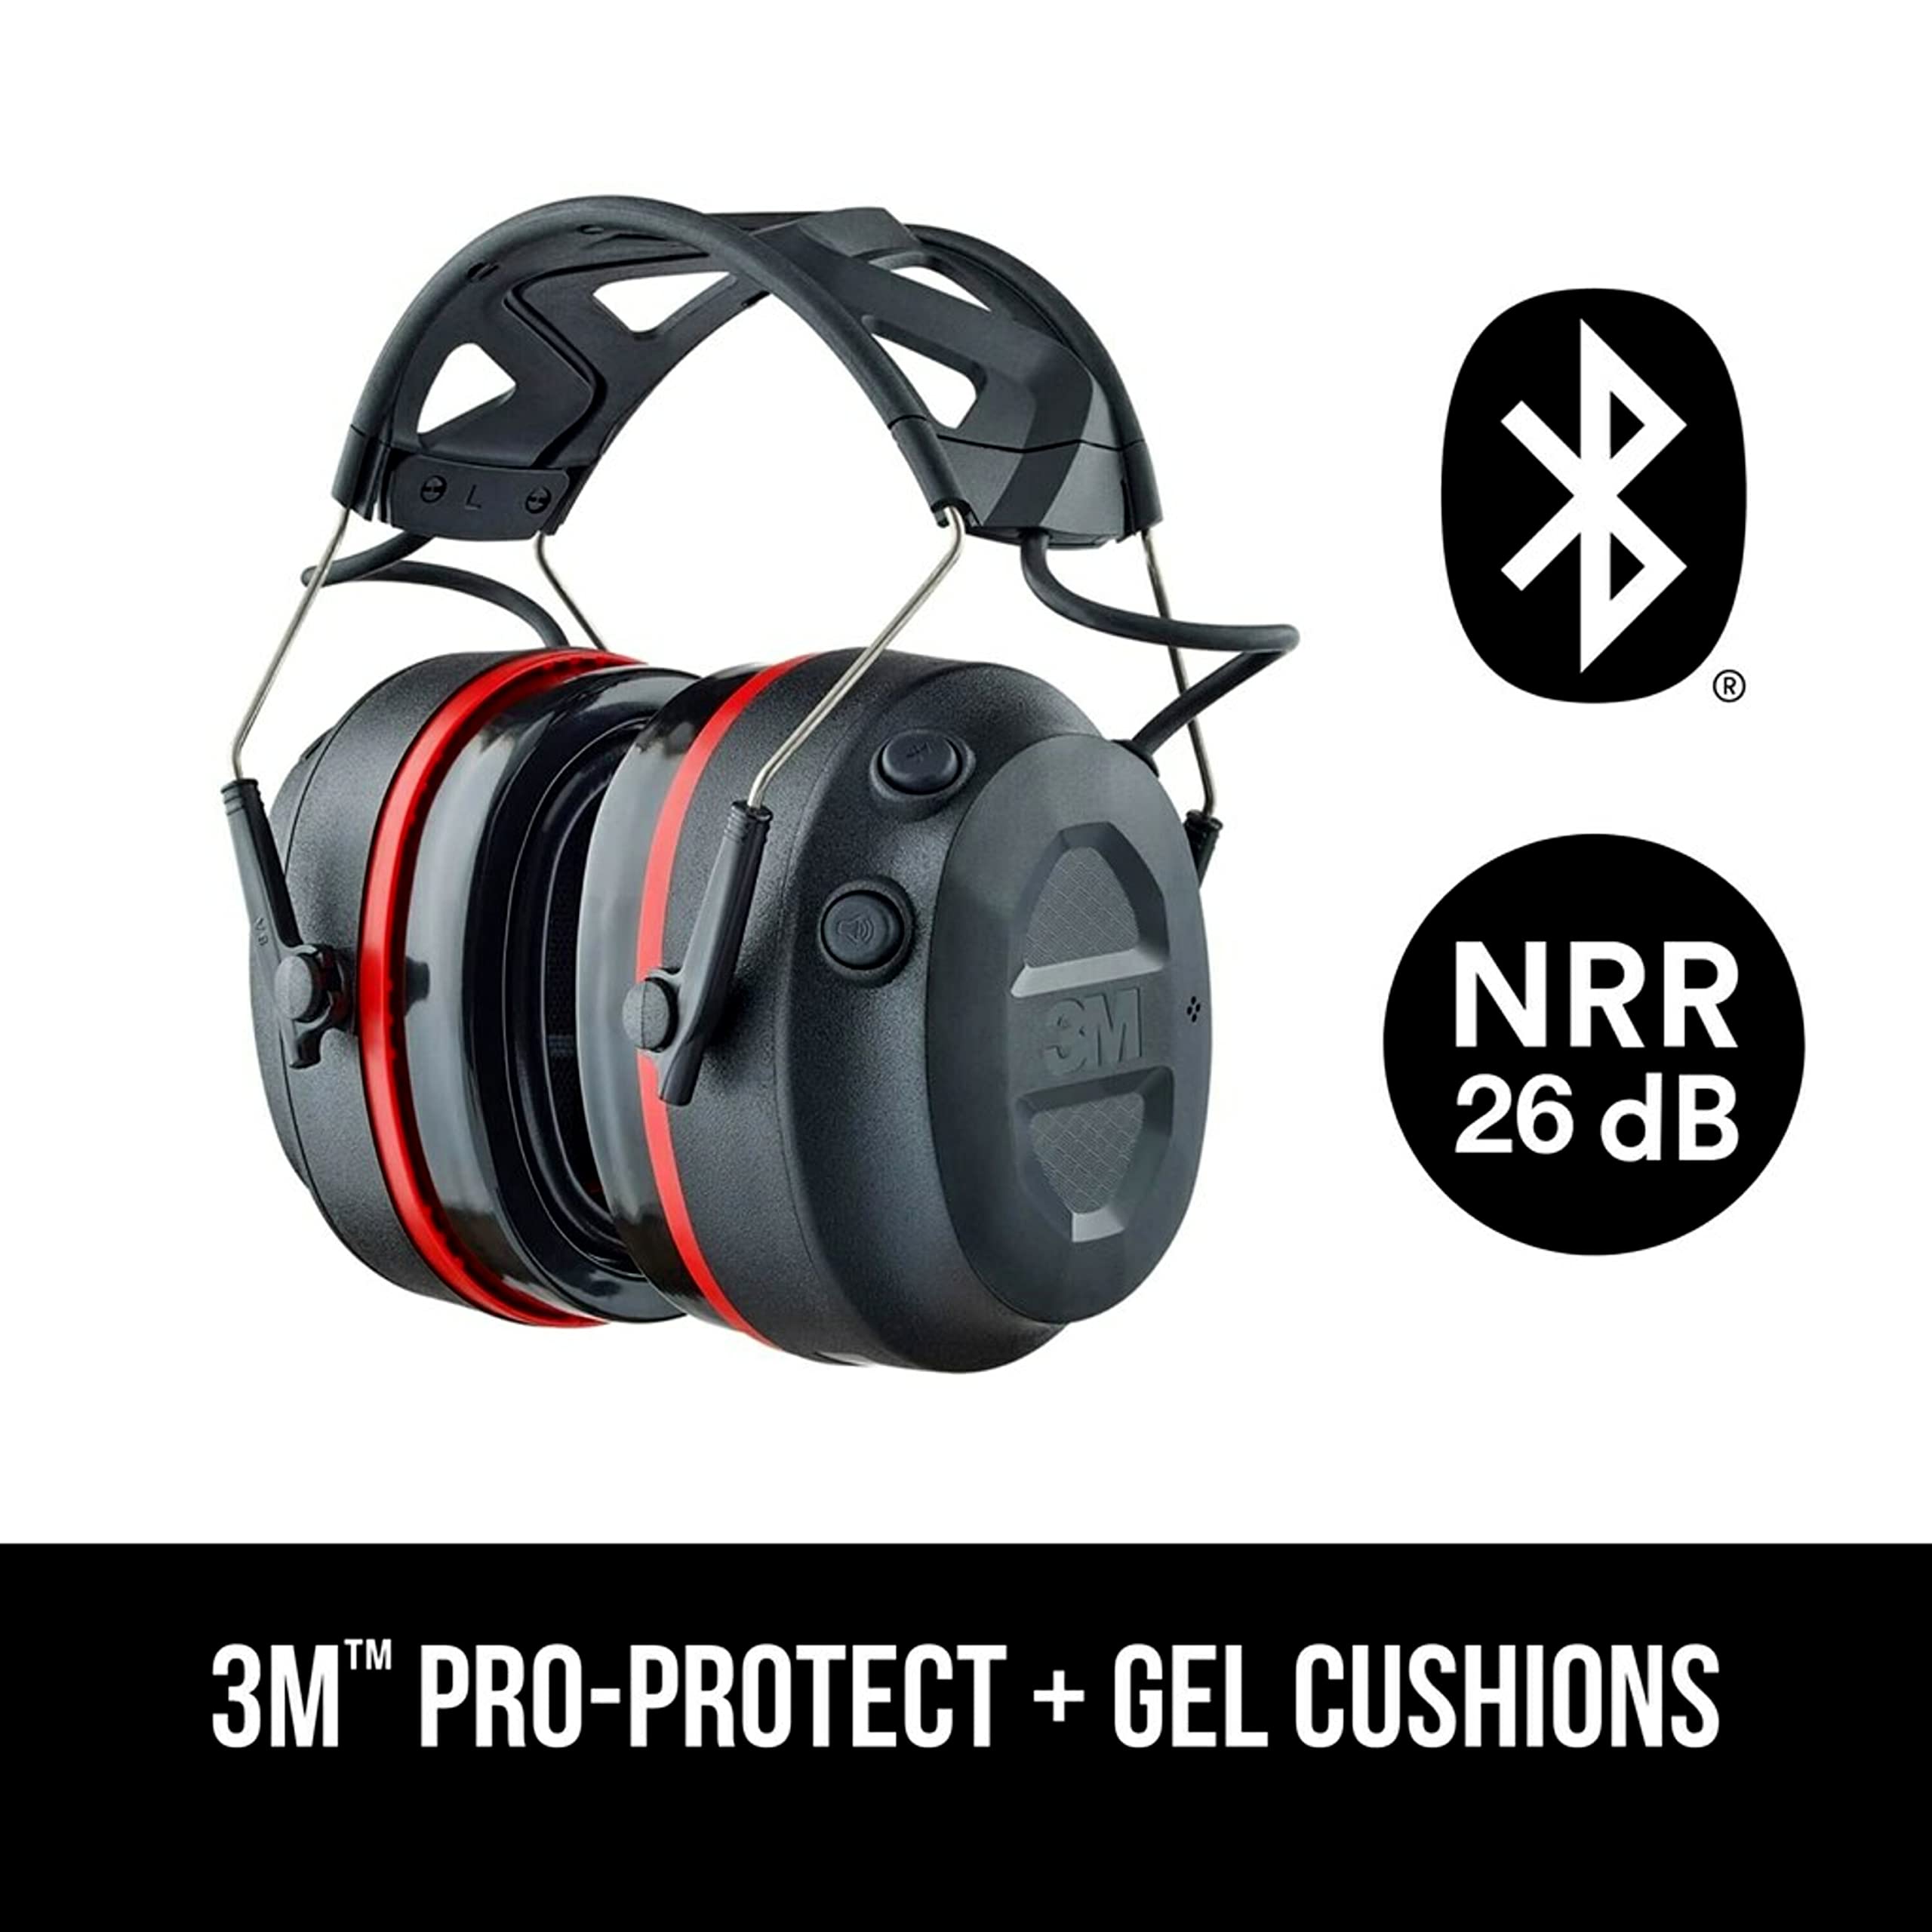 3M Safety Bundle: Pro-Protect Hearing Protector with Bluetooth Technology + 10-Pack Cool Flow Valve N95 Respirator 8511 + 1-Pair Safety Eyewear